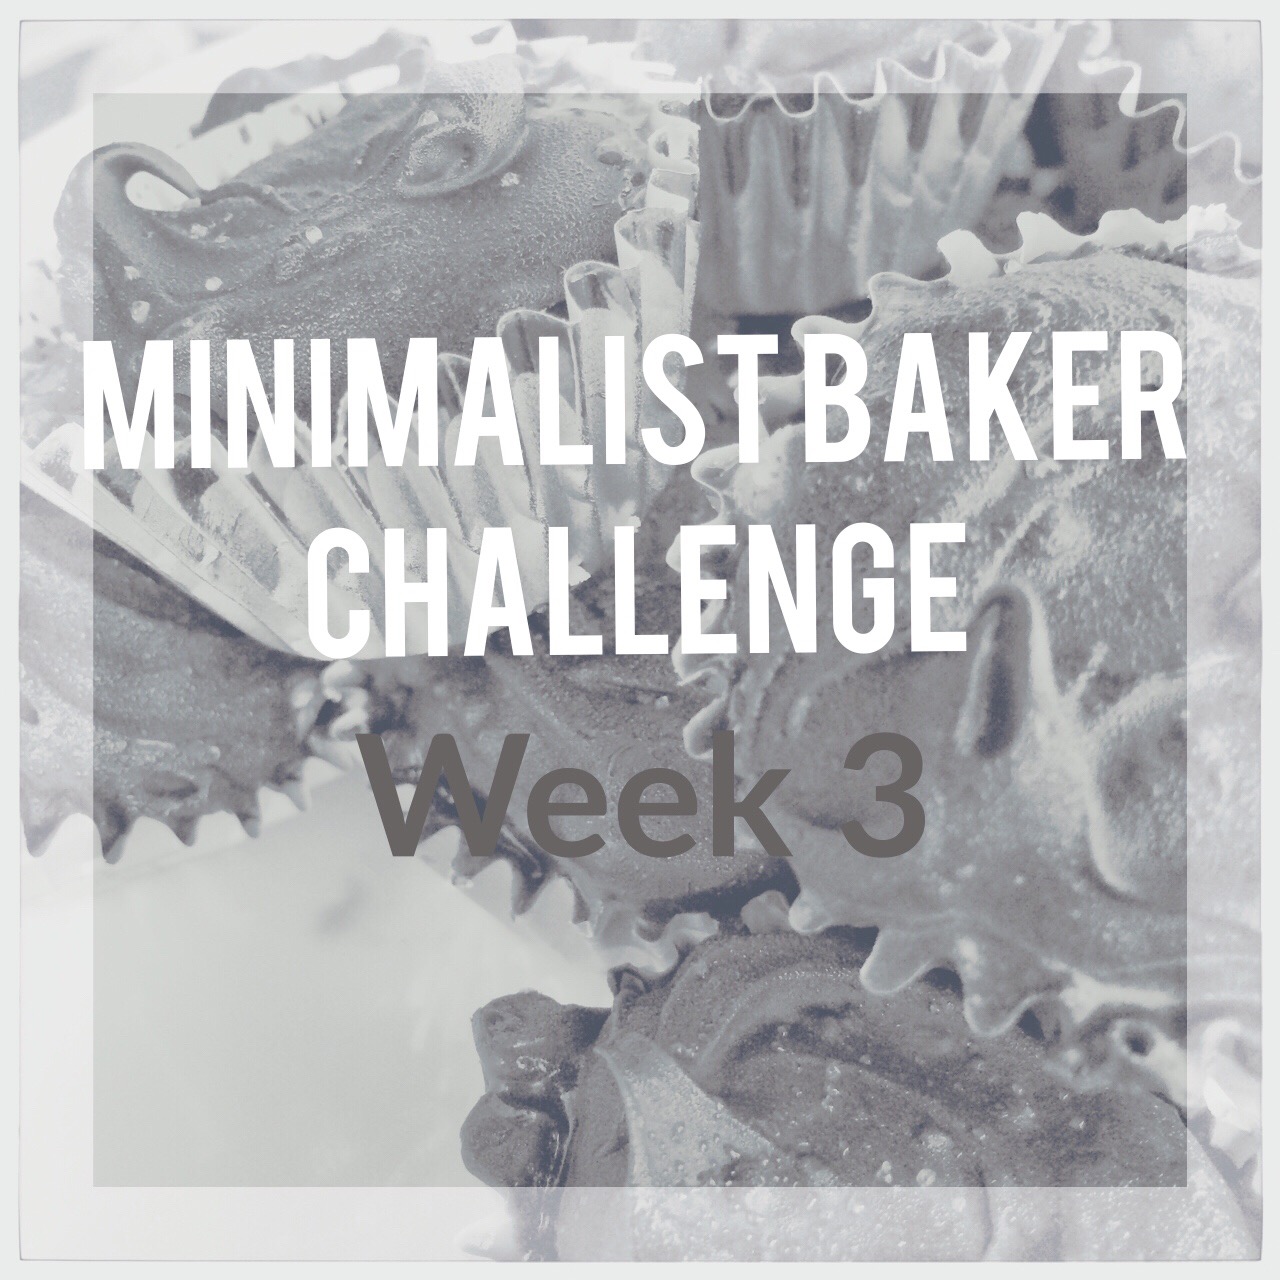 Week 3 Minimalist Baker Challenge – Recipes, Grocery List and Meal Plan